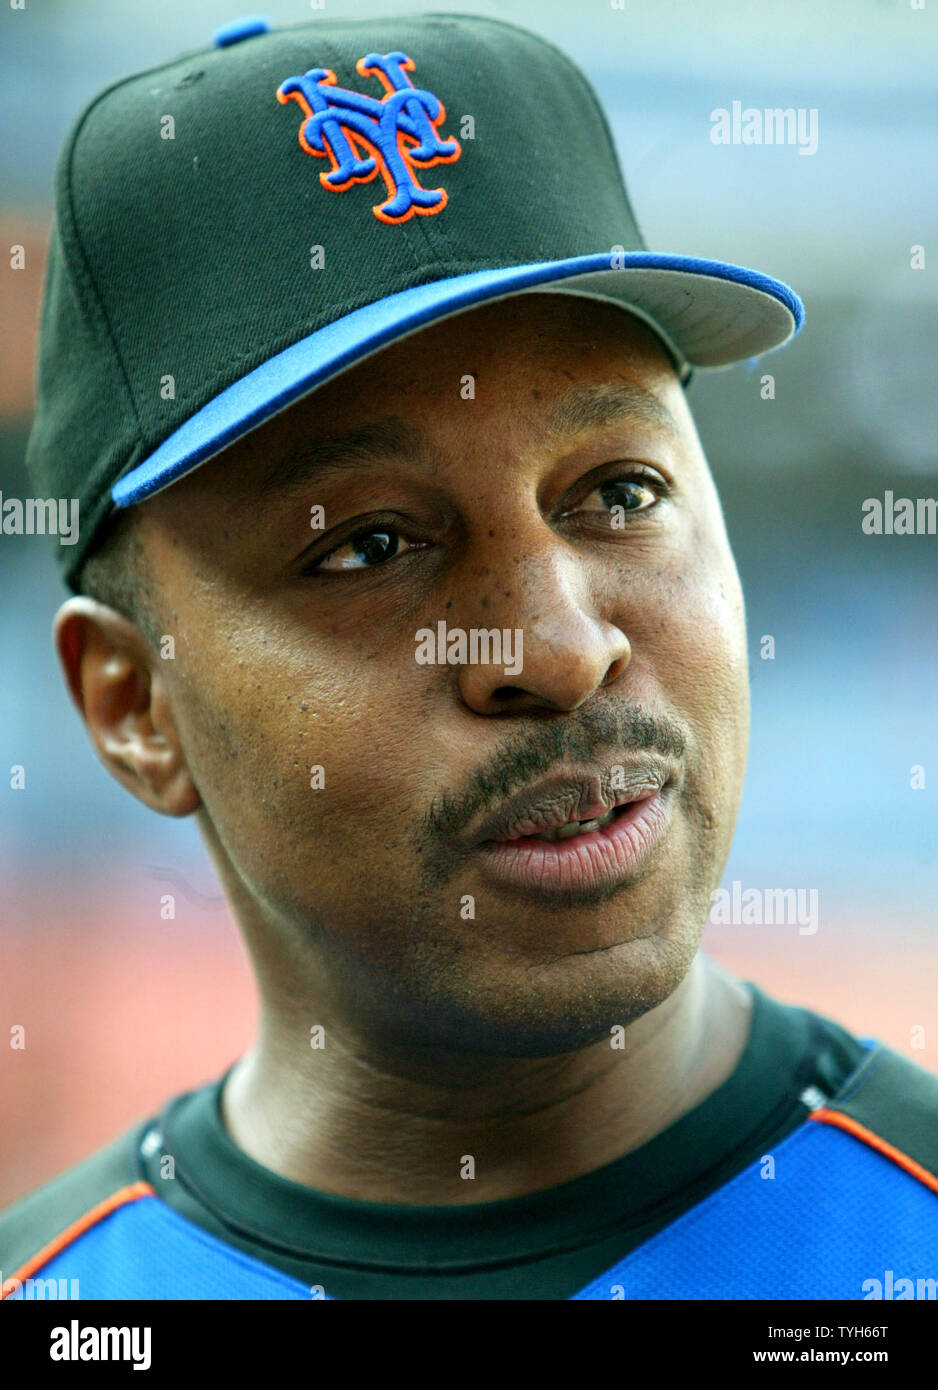 New York Mets' manager Willie Randolph is on hand during batting practice as the Mets prepare for their game against the Milwaukee Brewers at Shea Stadium on August 3, 2005 in New York City.  (UPI Photo/Monika Graff) Stock Photo